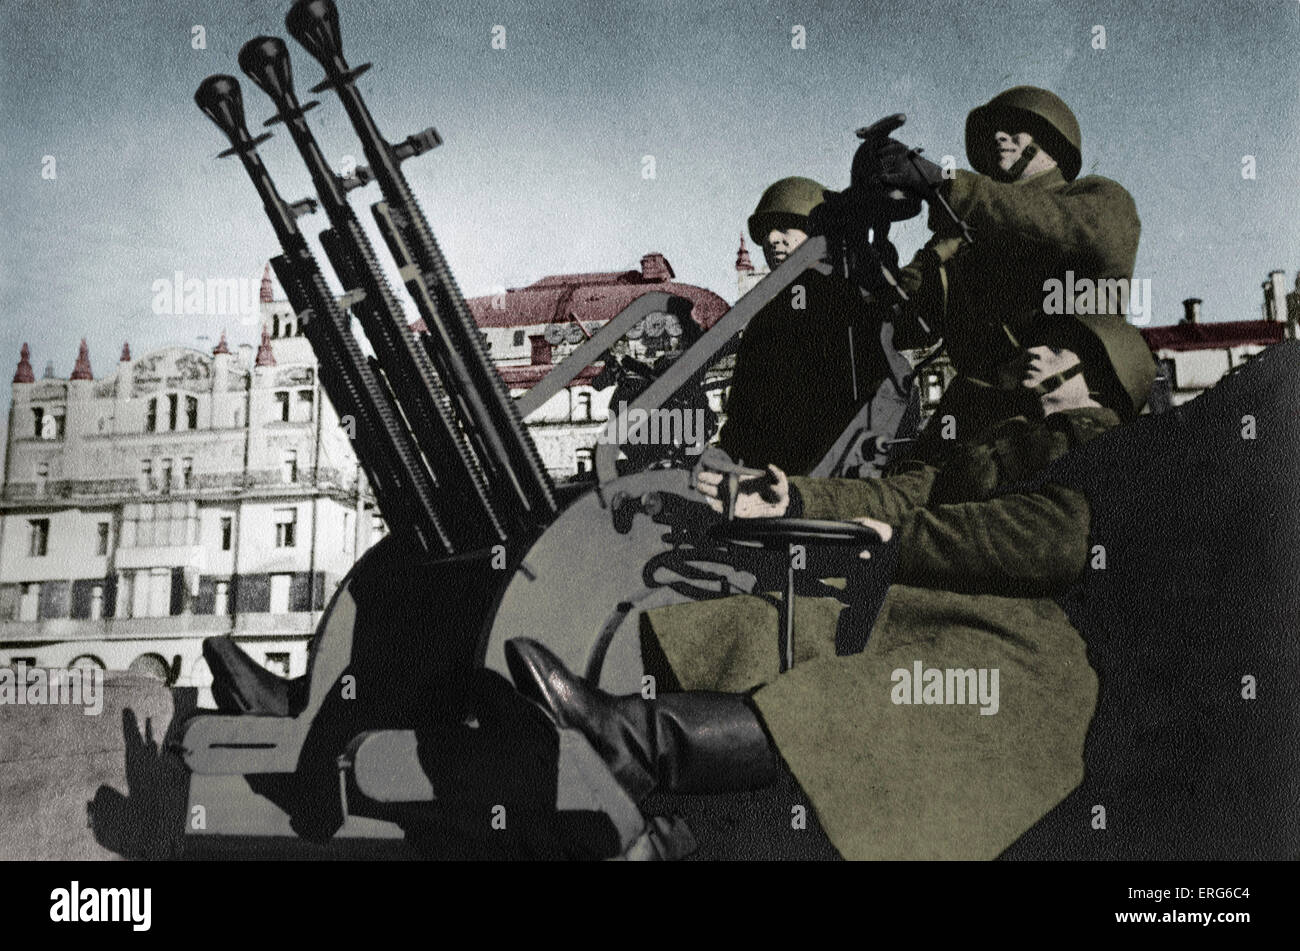 Anti-aircraft station in the centre of Moscow 1941 - during World War II Prokofiev Shostakovich background.  Schostakowitsch Stock Photo